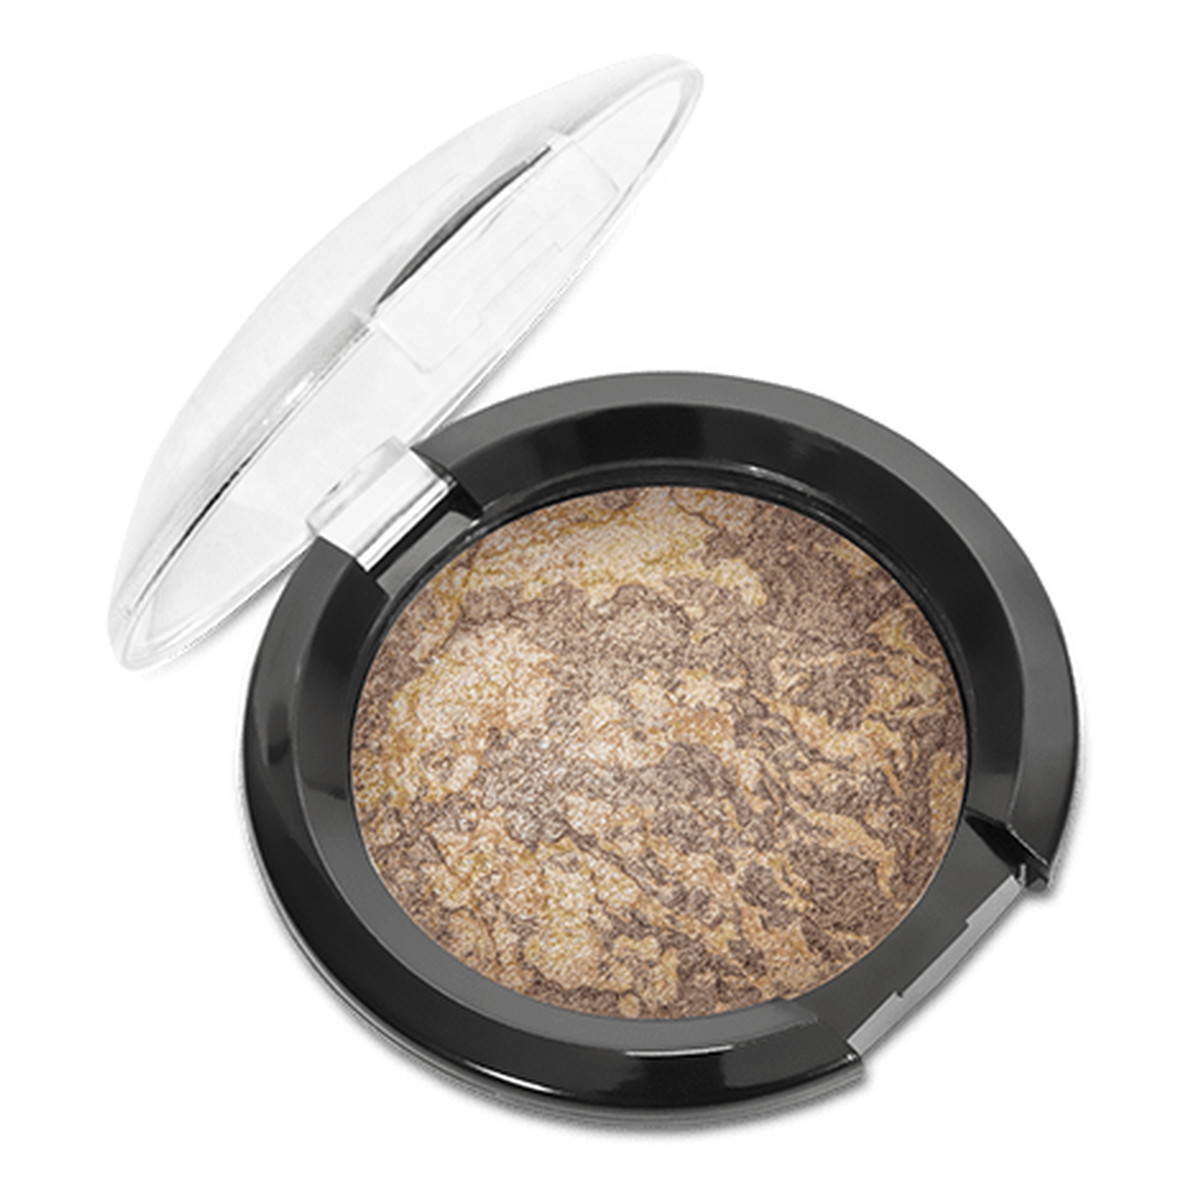 Affect MINERAL BAKED POWDER Mineralny Puder Wypiekany 10g